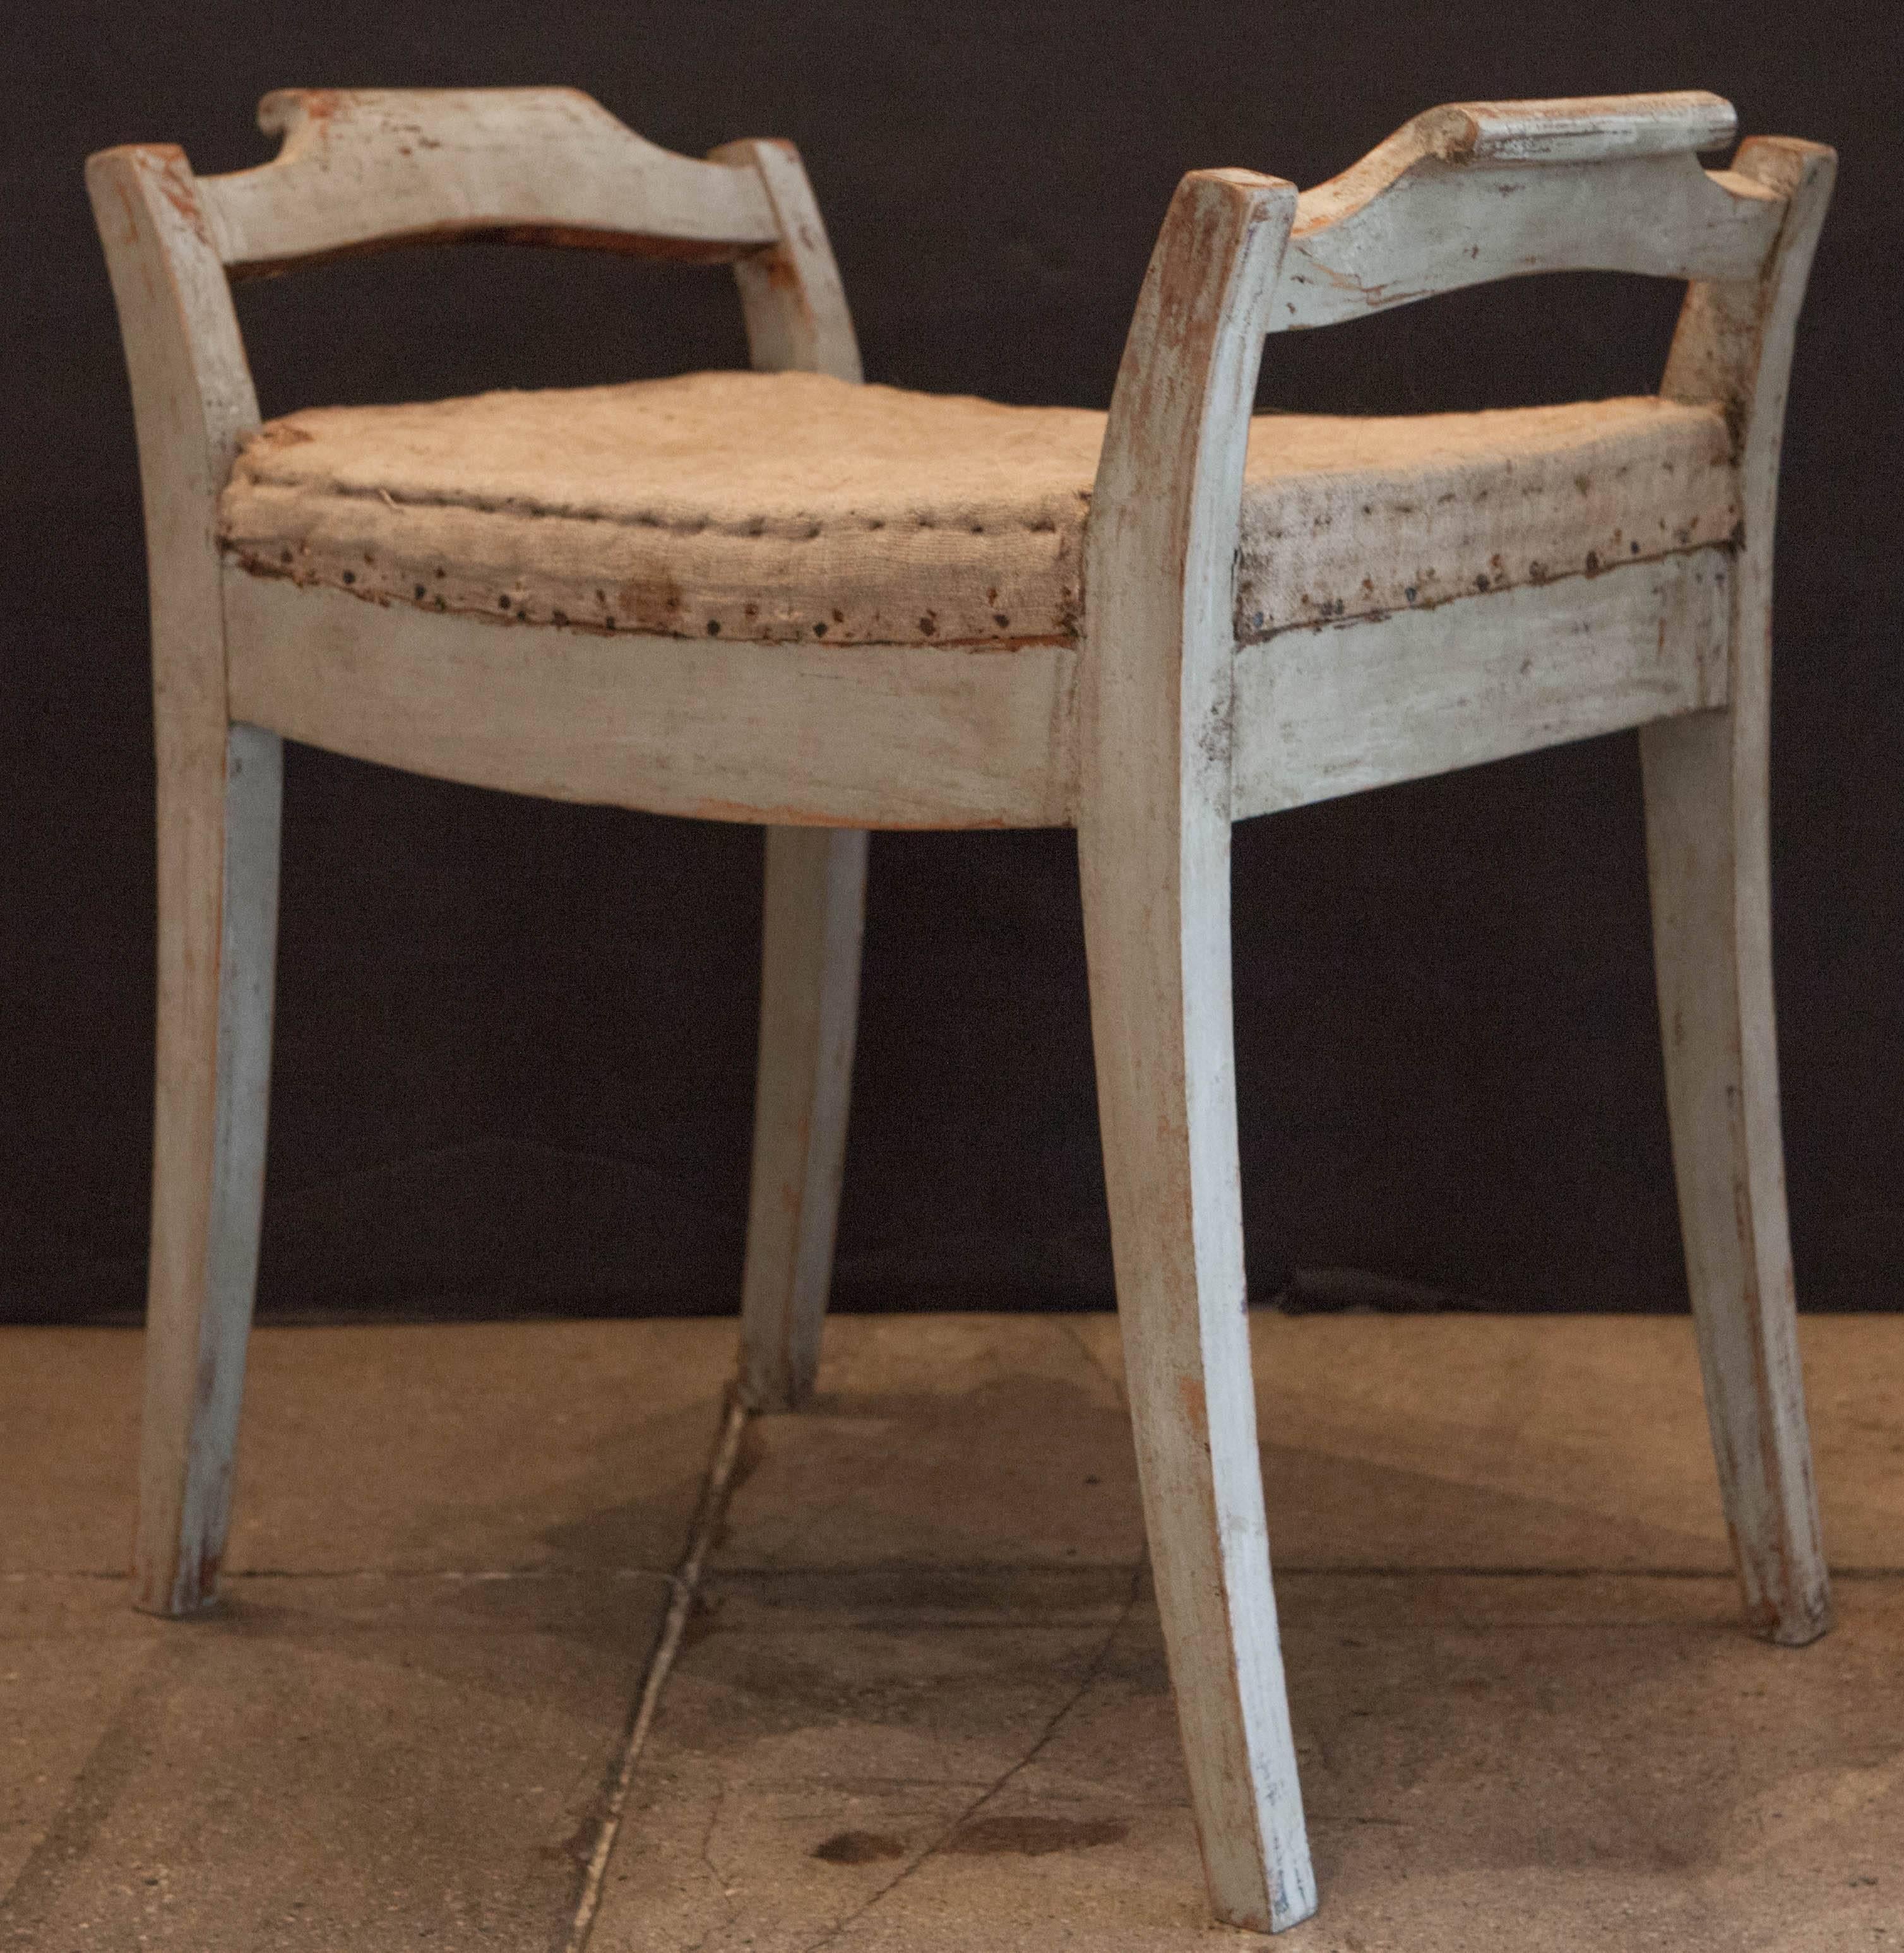 Early 19th Century Pair of Gustavian Stools, Sweden, circa 1810